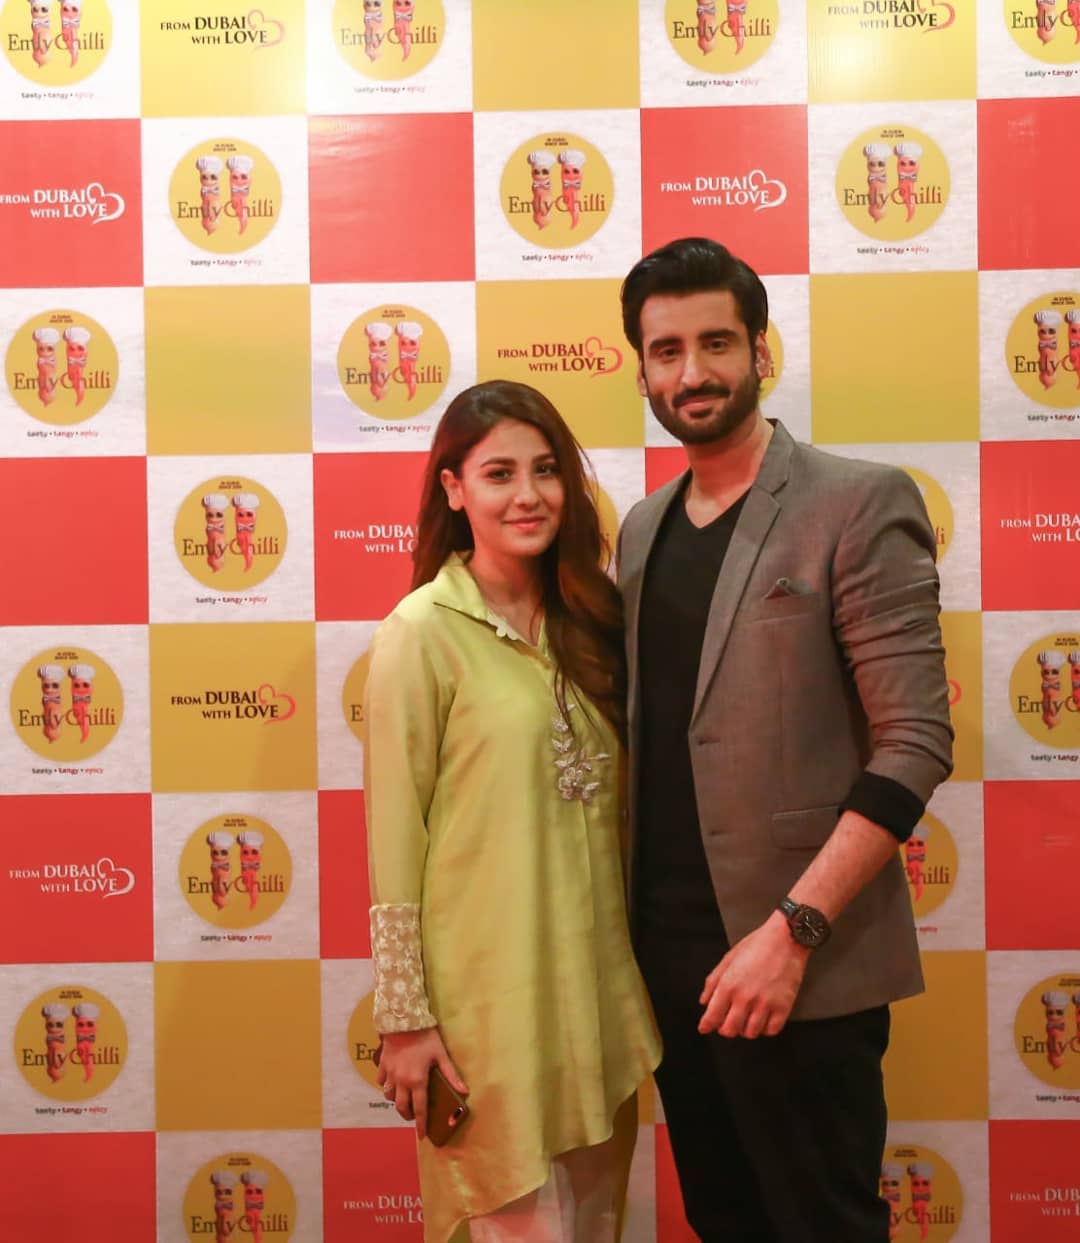 Hina Altaf and Agha Ali Spotted at Emly Chilli Restaurant Karachi